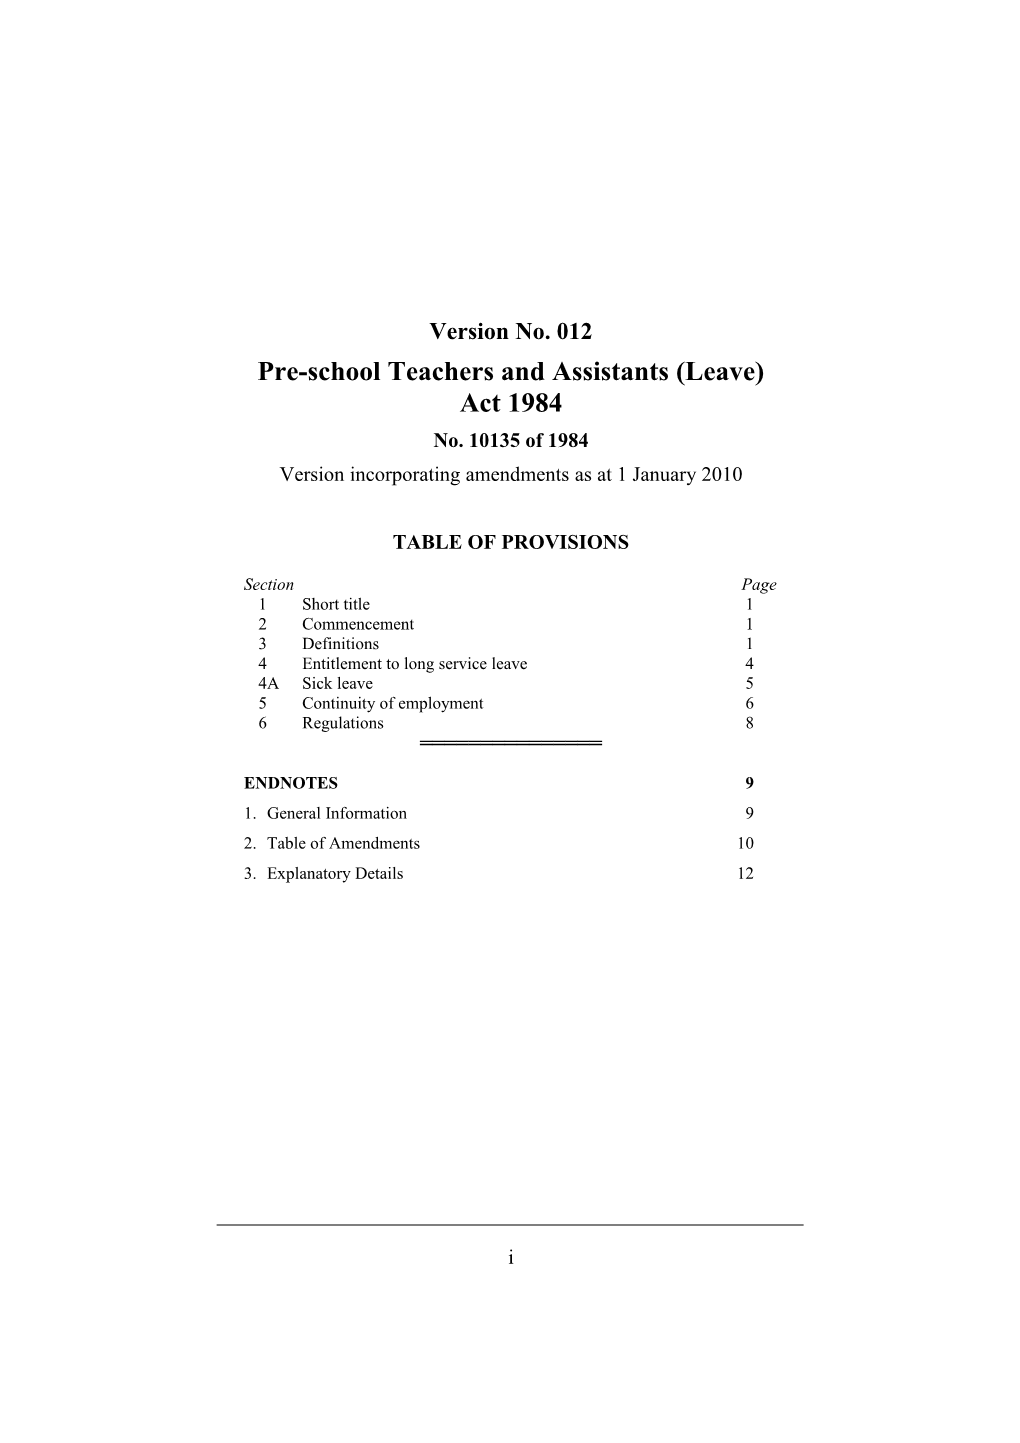 Pre-School Teachers and Assistants (Leave) Act 1984